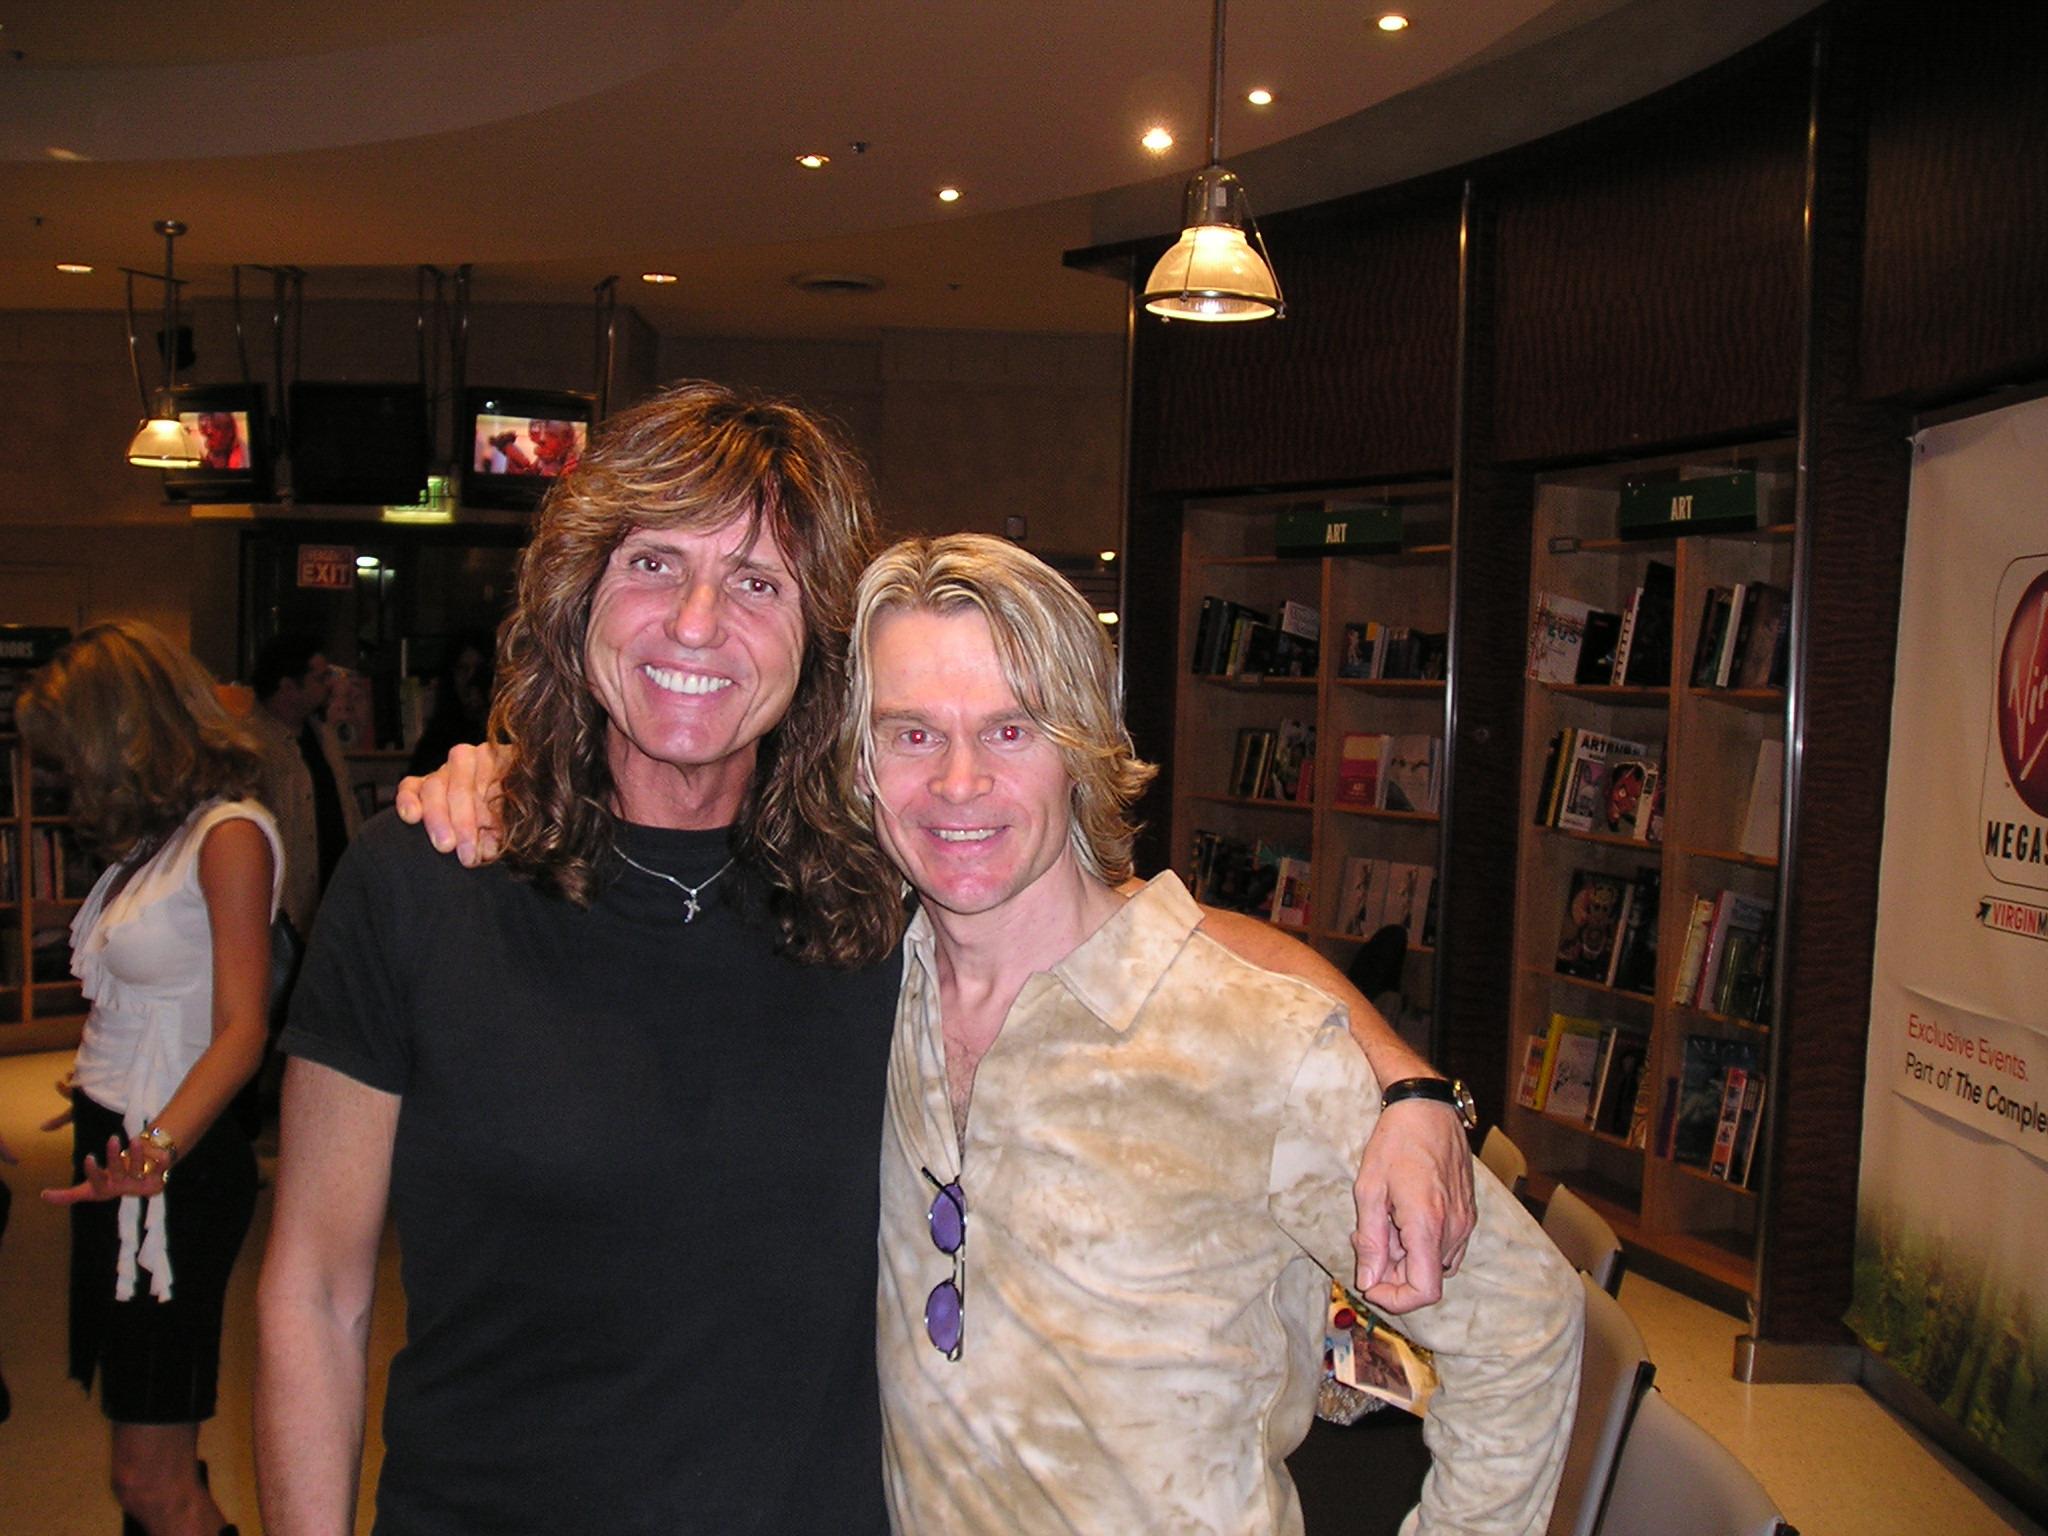 Happy Birthday to my good friend and former band mate and bandleader.. David Coverdale 